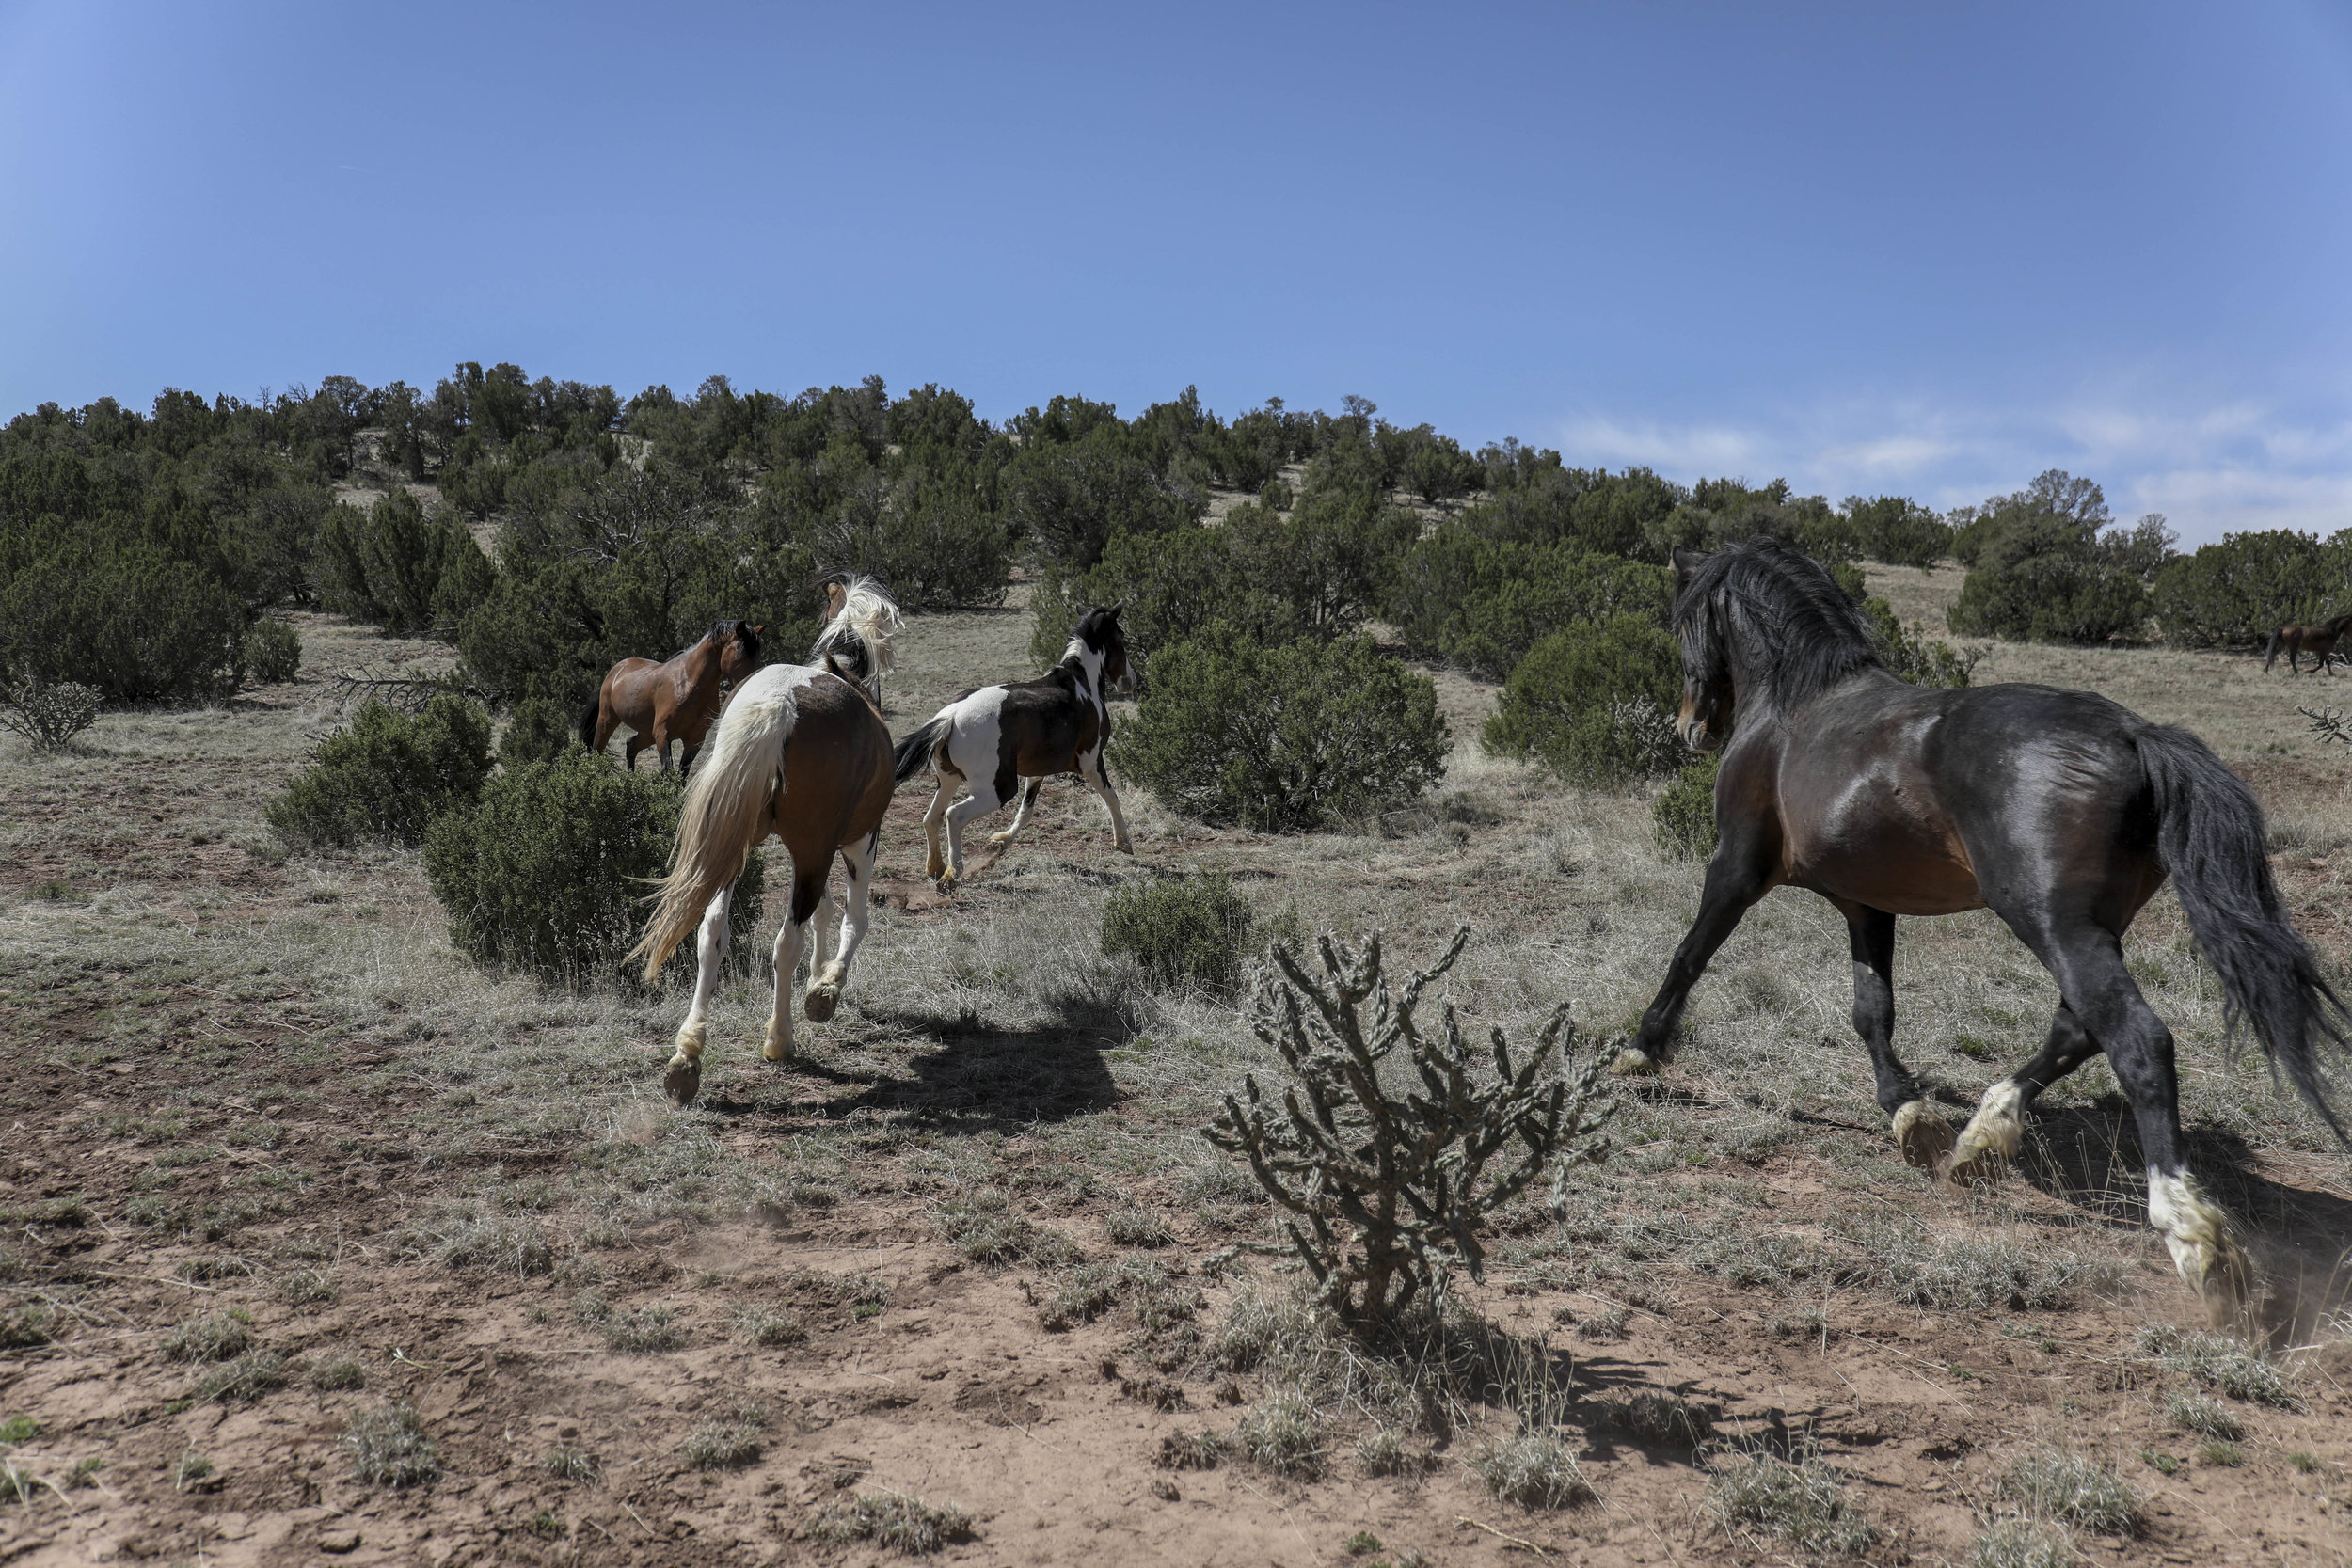  Tiny, Blossom, Rosita and Milagros explore their new home in San Jose where they will remain free roaming. A lot of preparation went into preparing the property for the horses according to deCastro. “Many things needed to be considered for feed and 